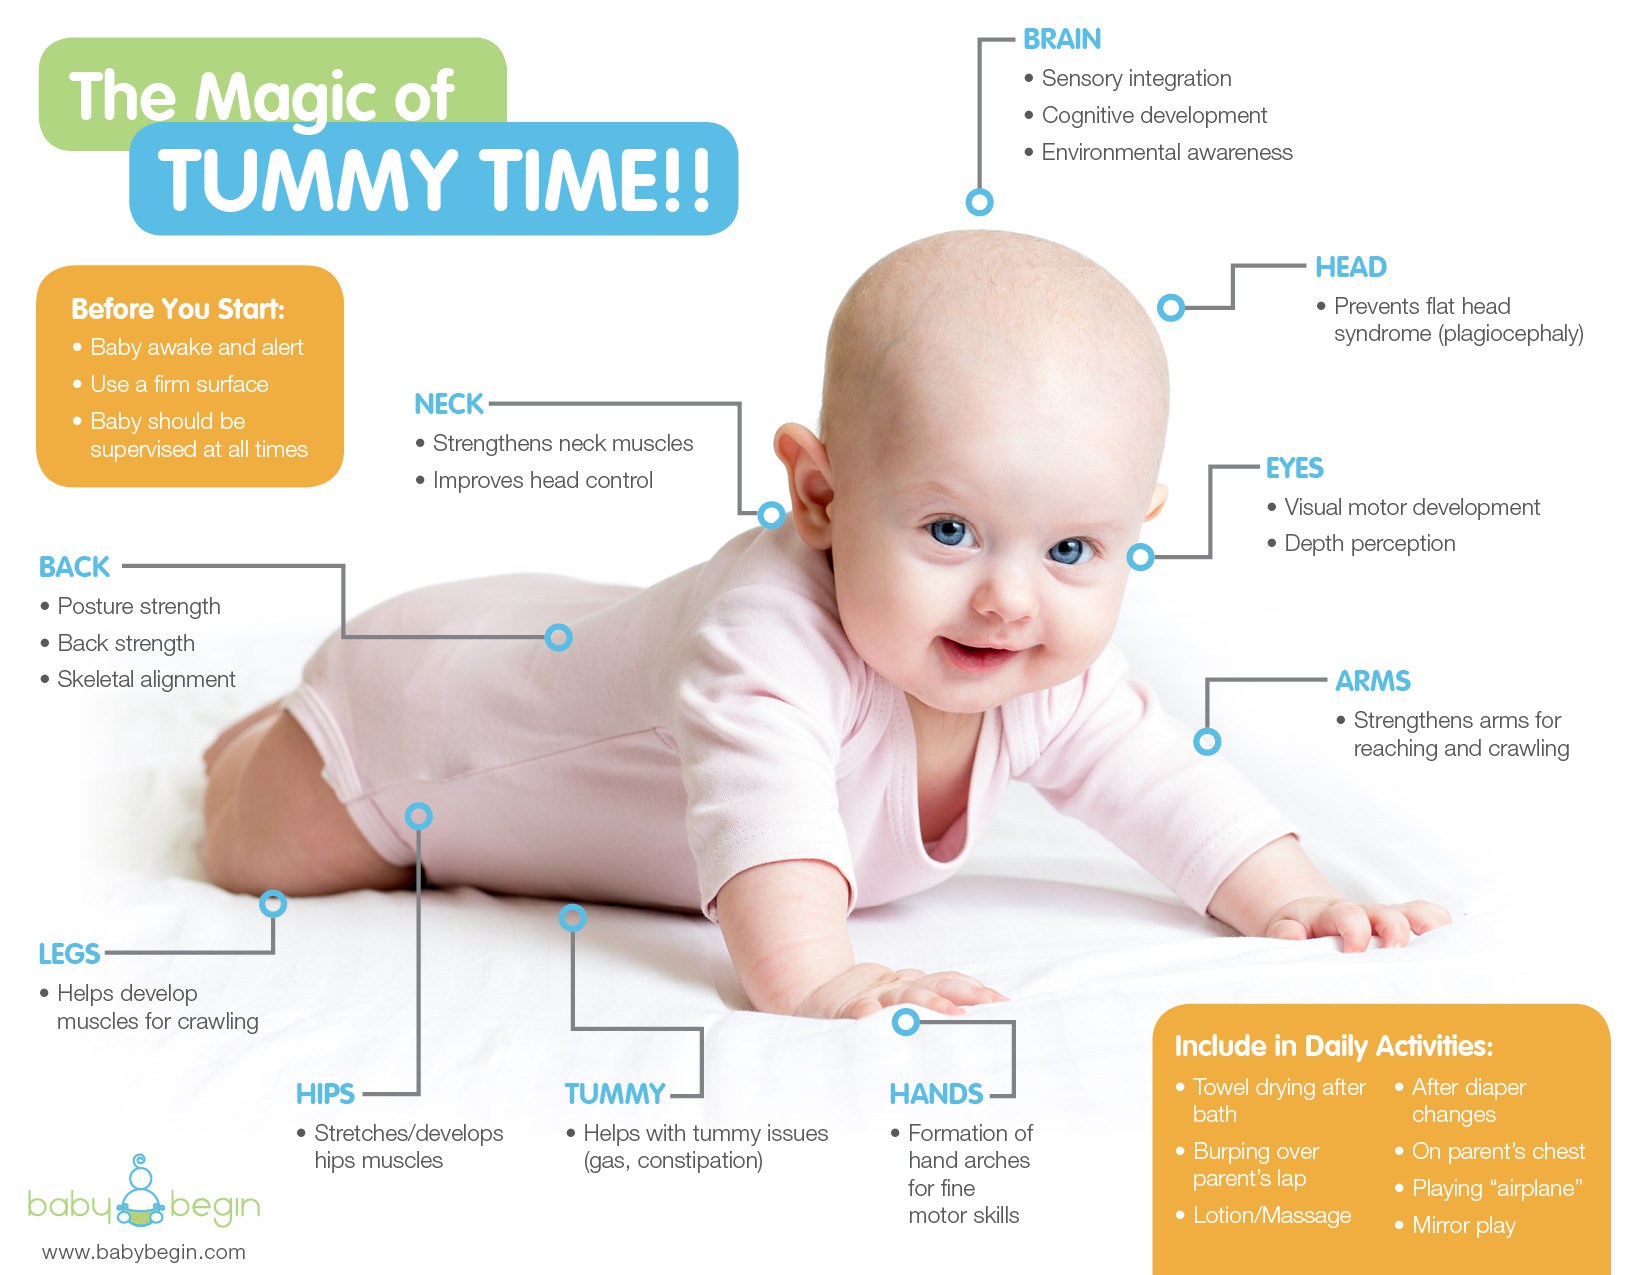 Baby Development Tummy Time: Why It’s Important and How to Do It